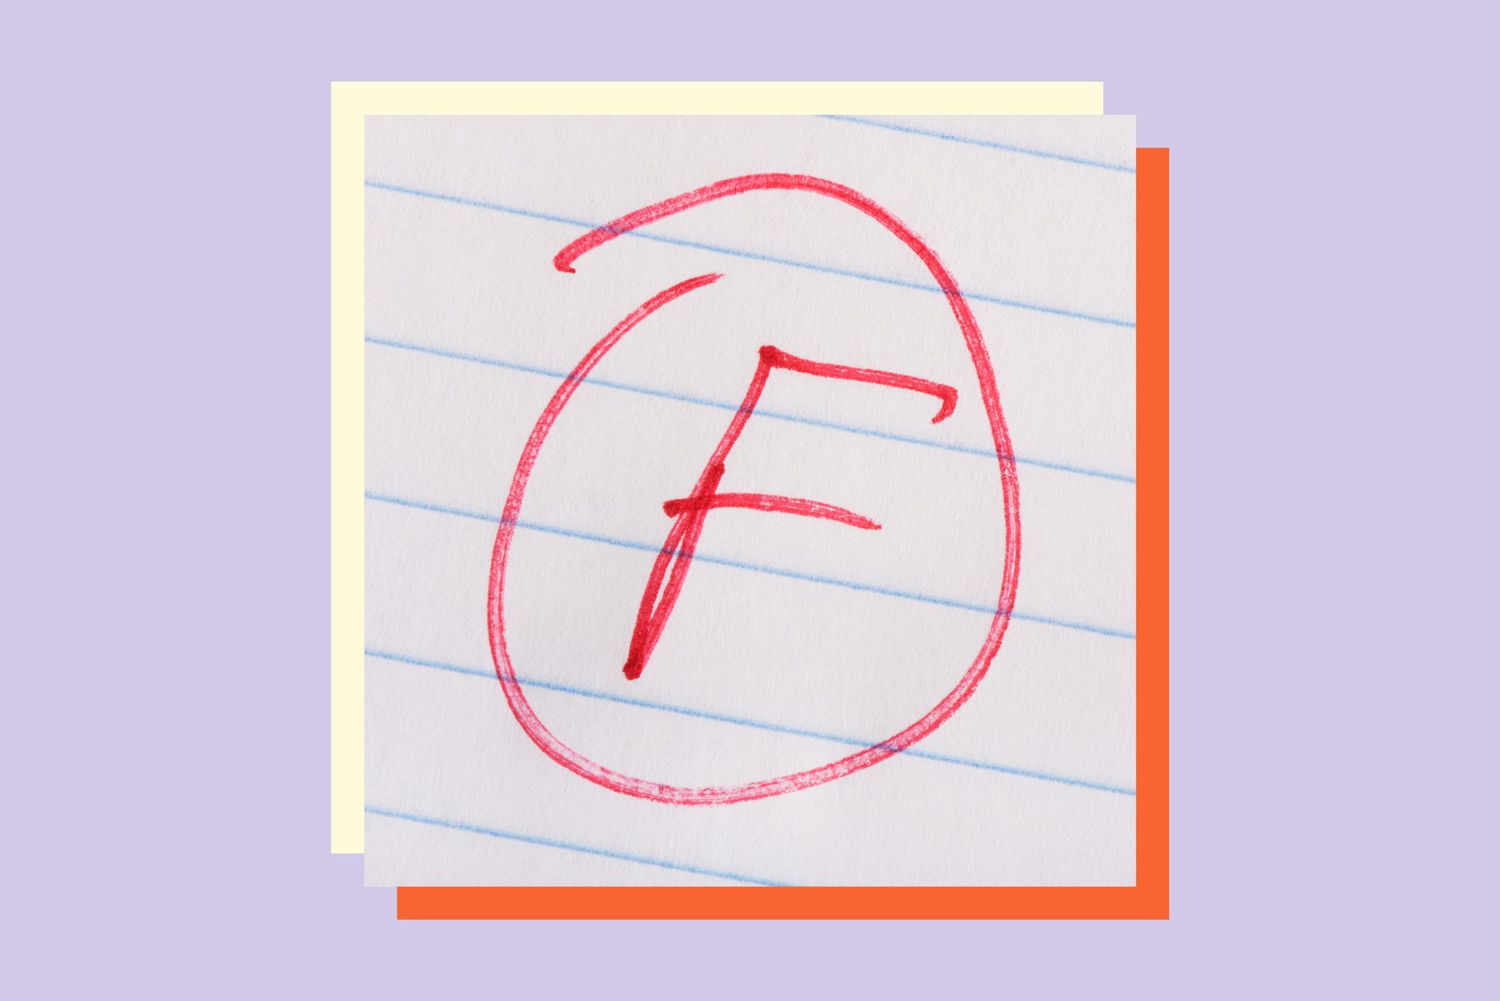 An image of an F on a colorful background.